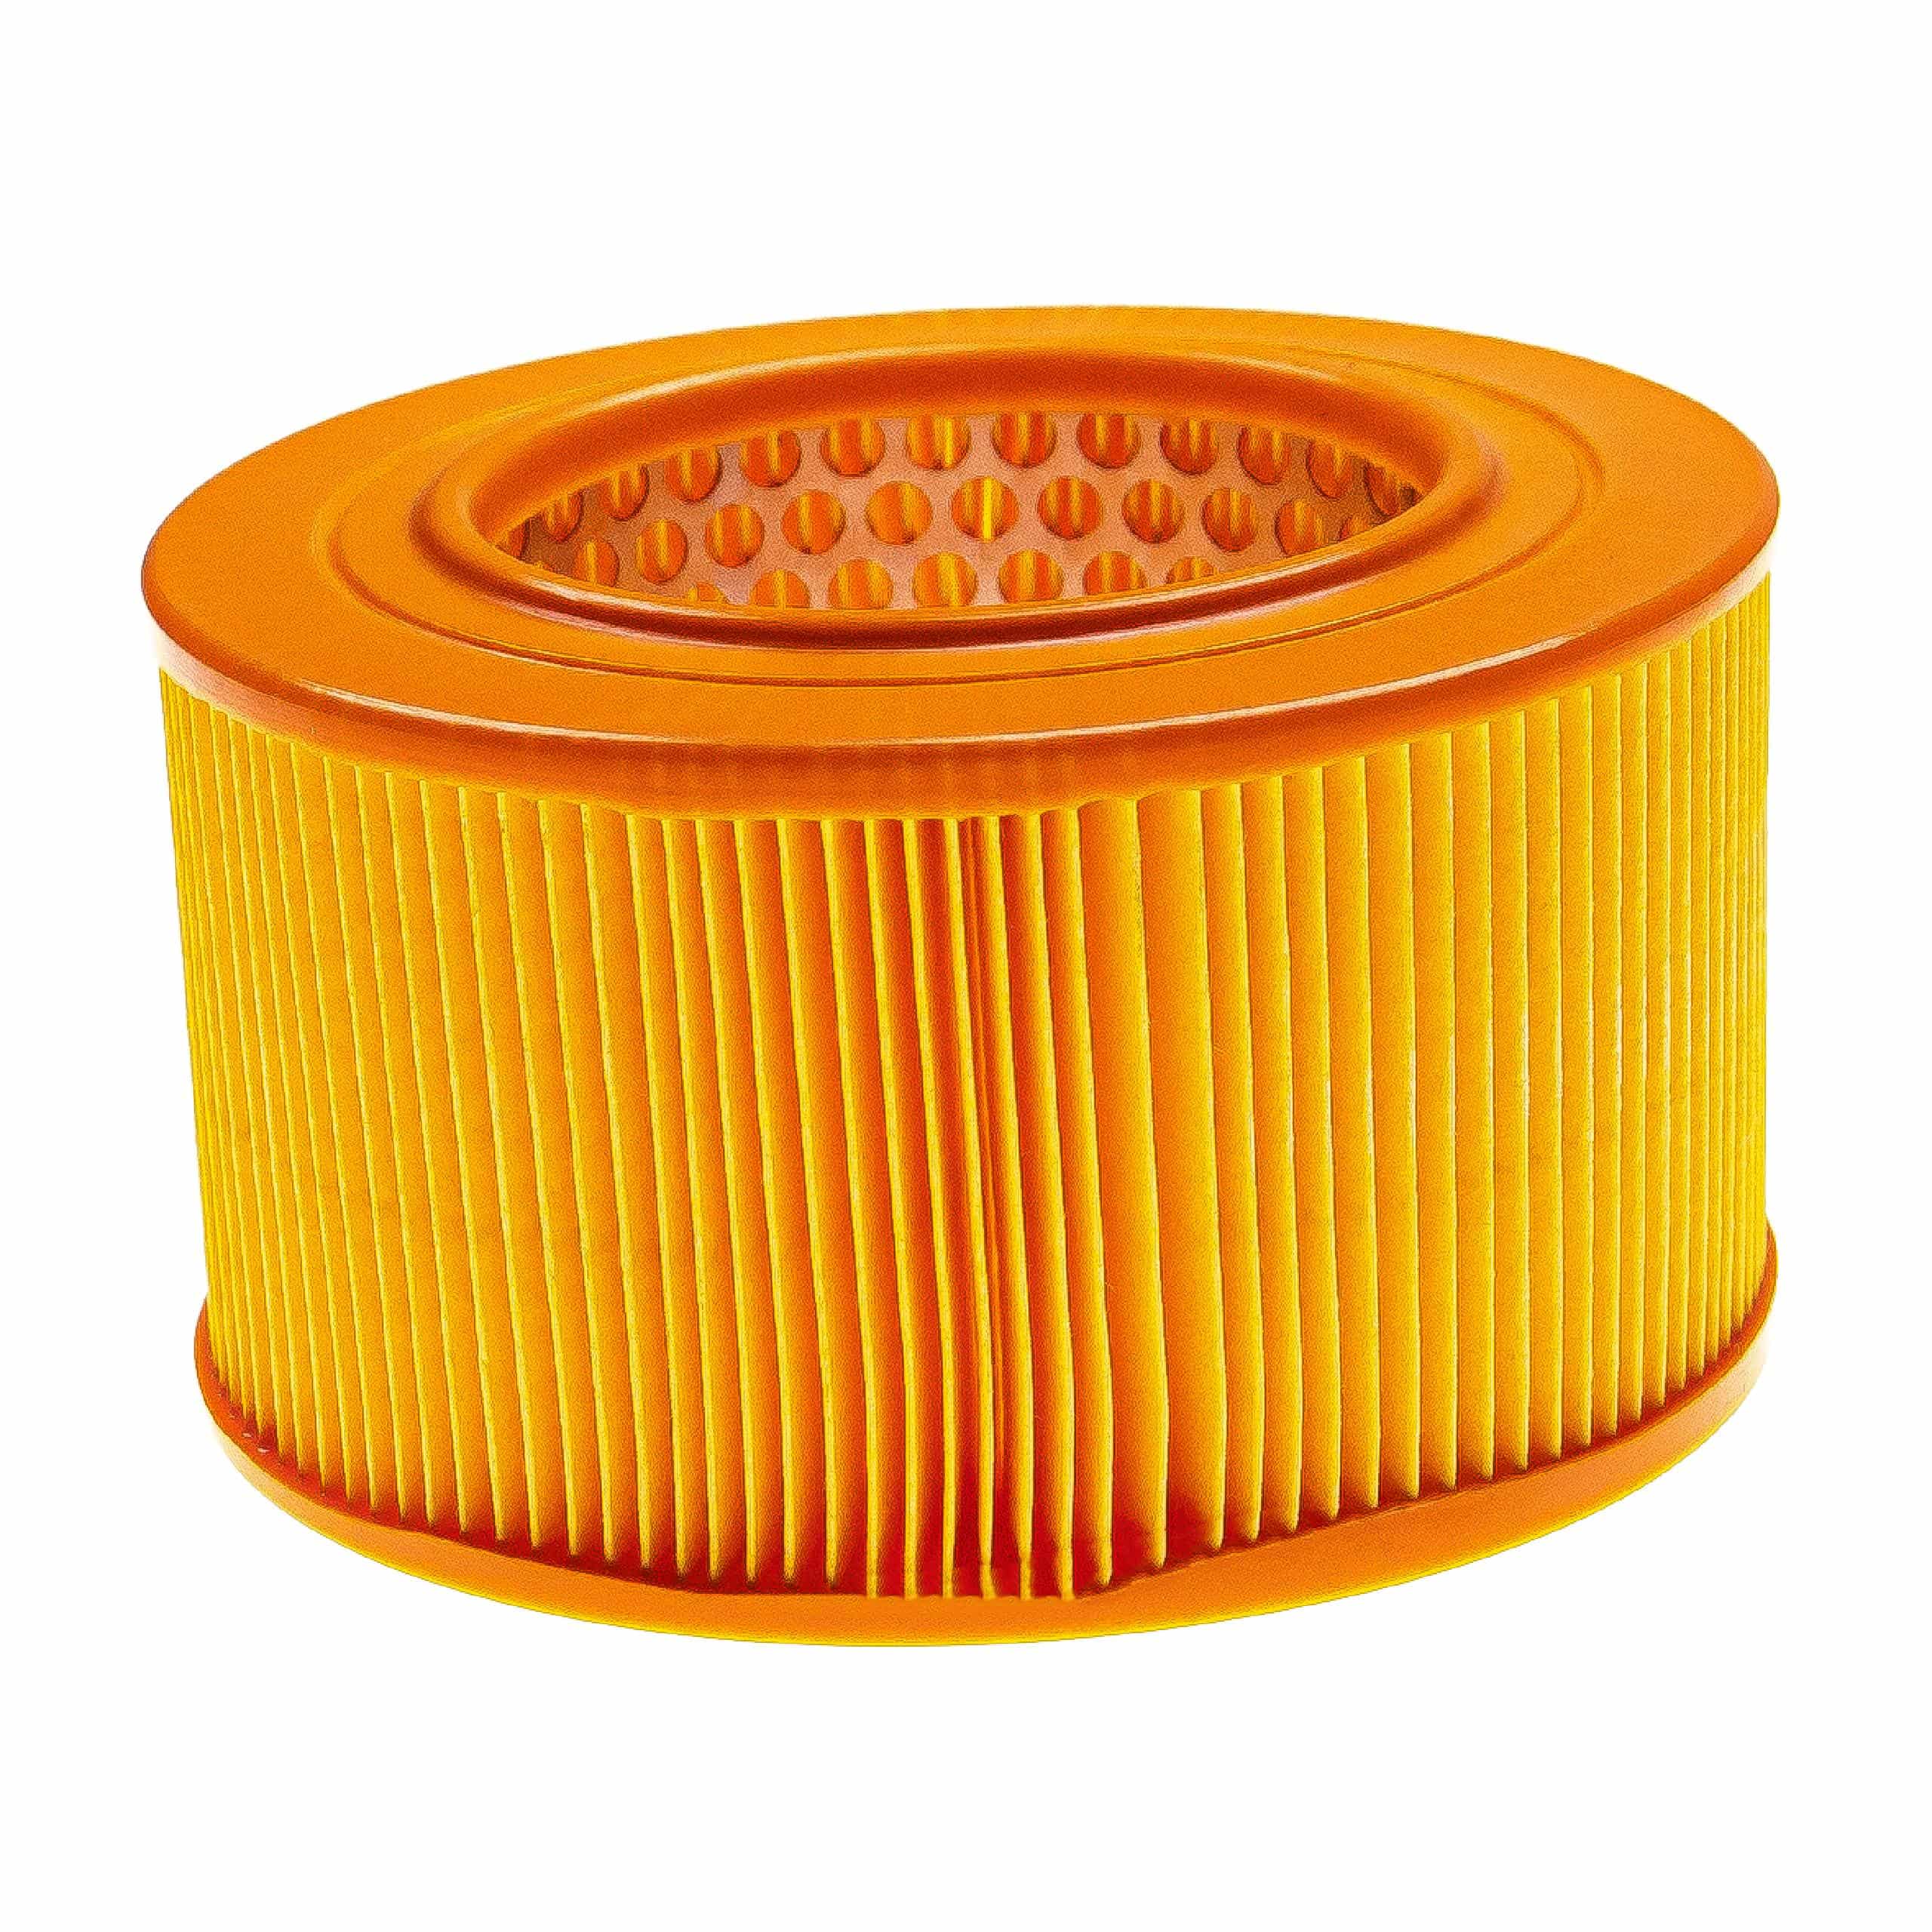 vhbw Filter replacement for Bomag 05727220 for Vibratory Plate, Rammer Compactor